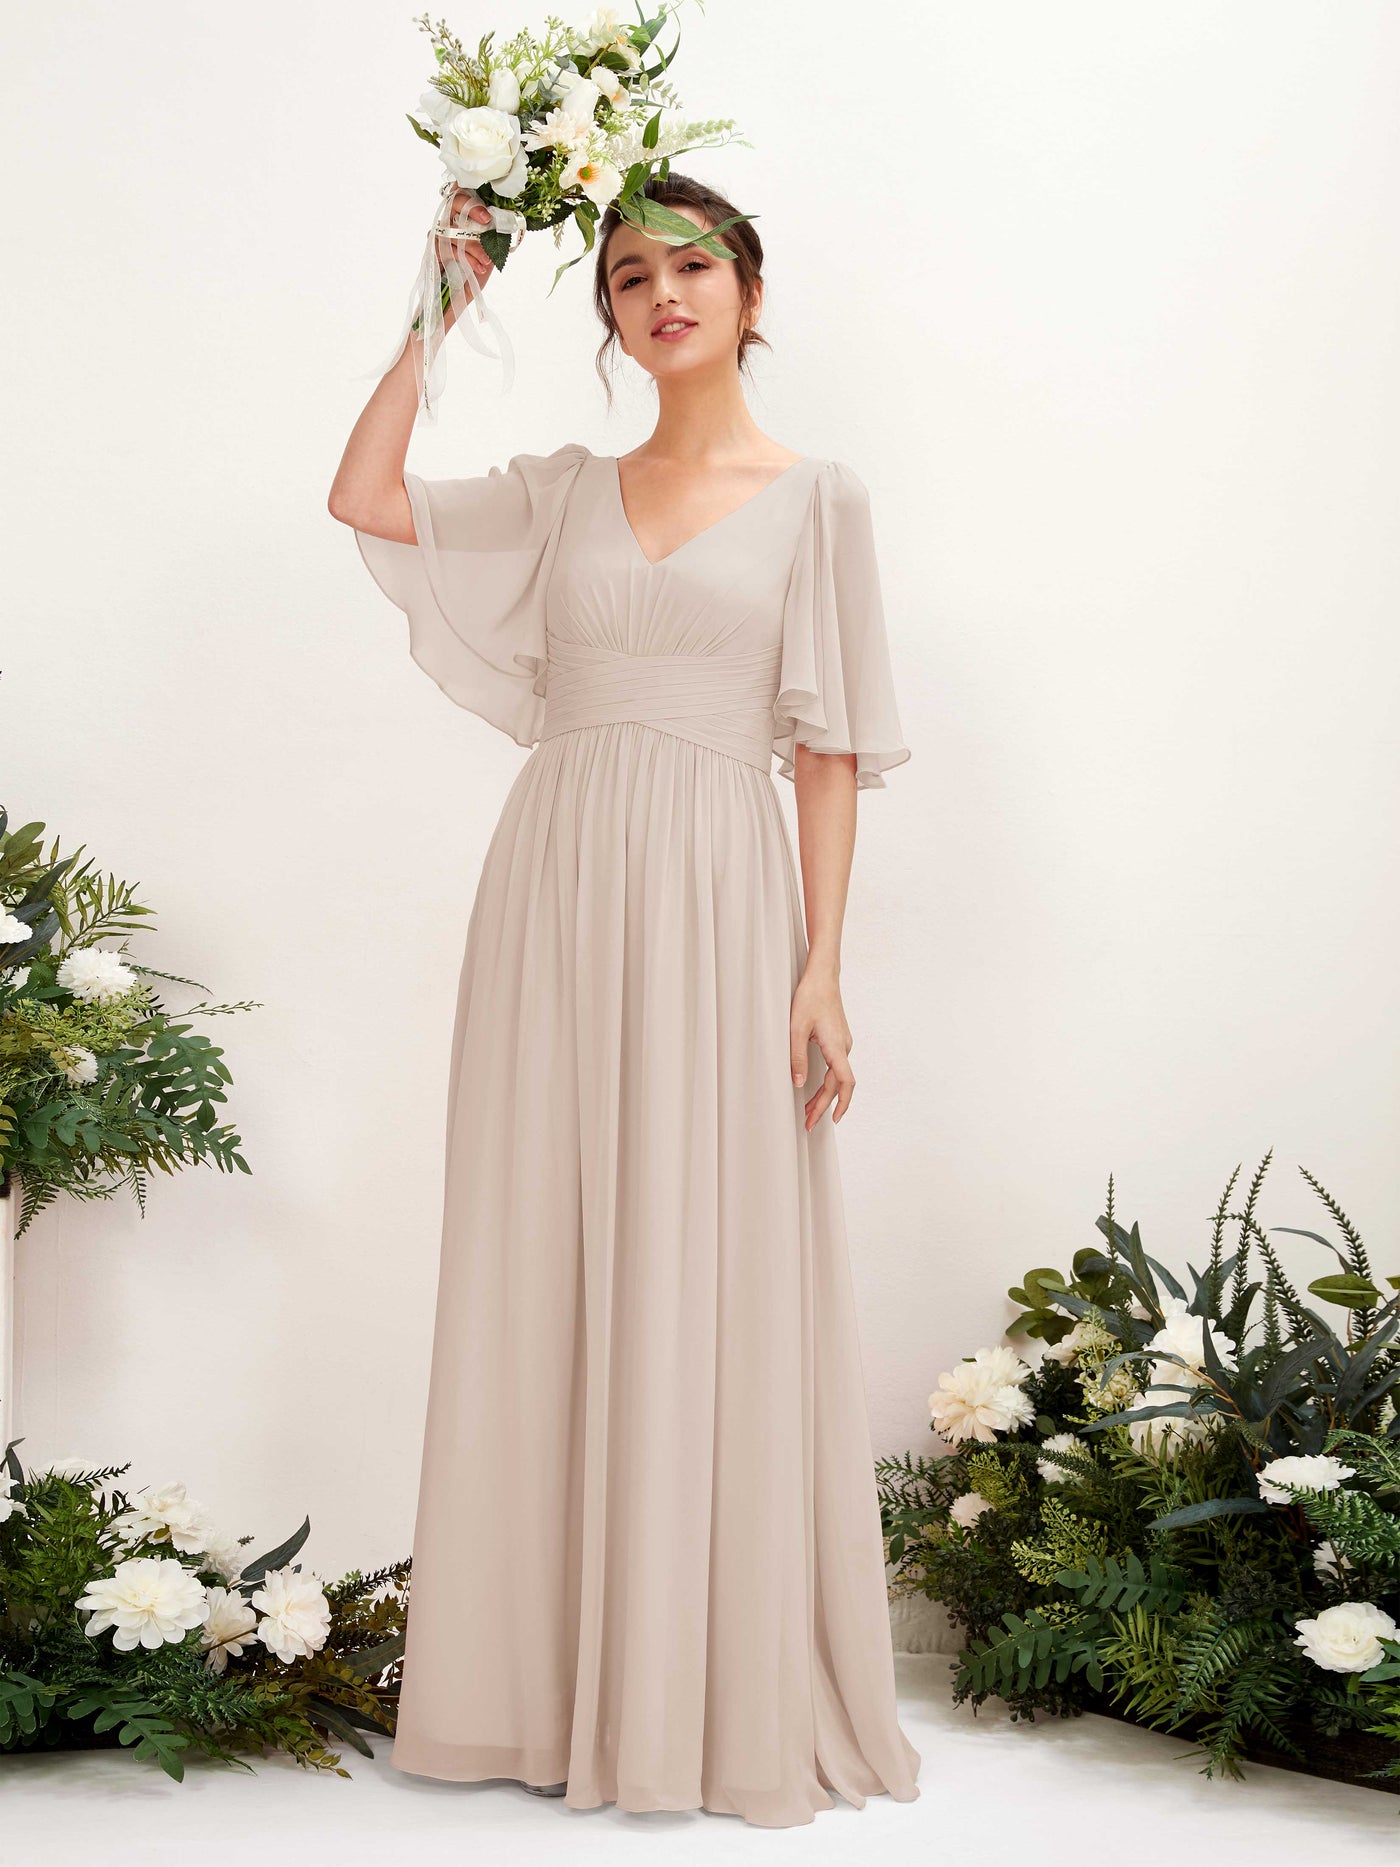 Champagne Bridesmaid Dresses Bridesmaid Dress A-line Chiffon V-neck Full Length 1/2 Sleeves Wedding Party Dress (81221616)#color_champagne